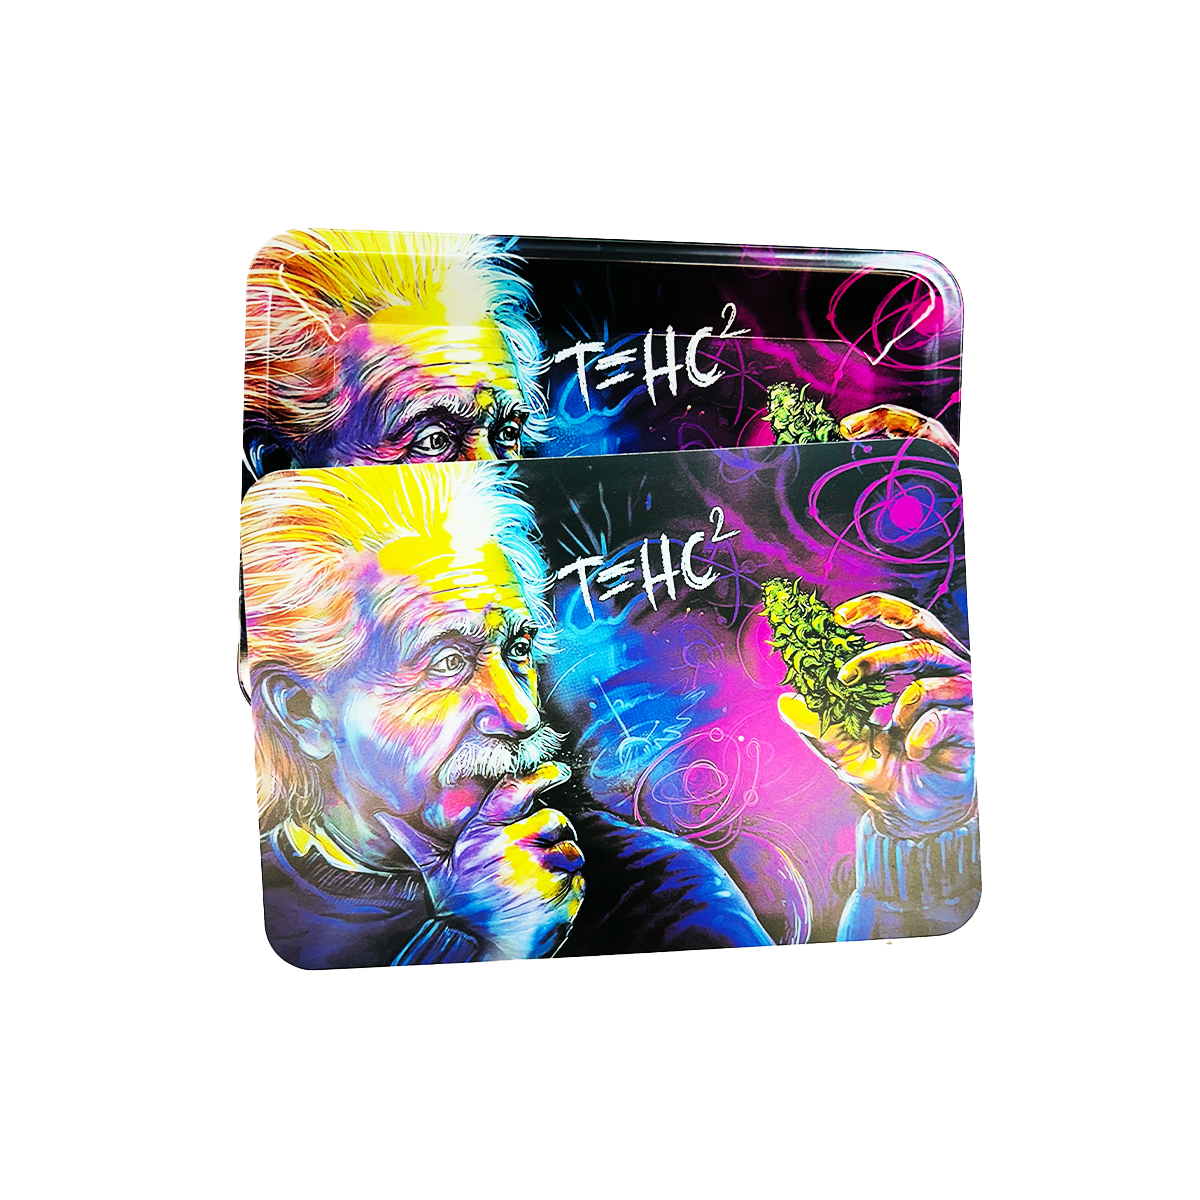 T=HC Magnetic Lid Rolling Tray Small - Size 7in x 5in